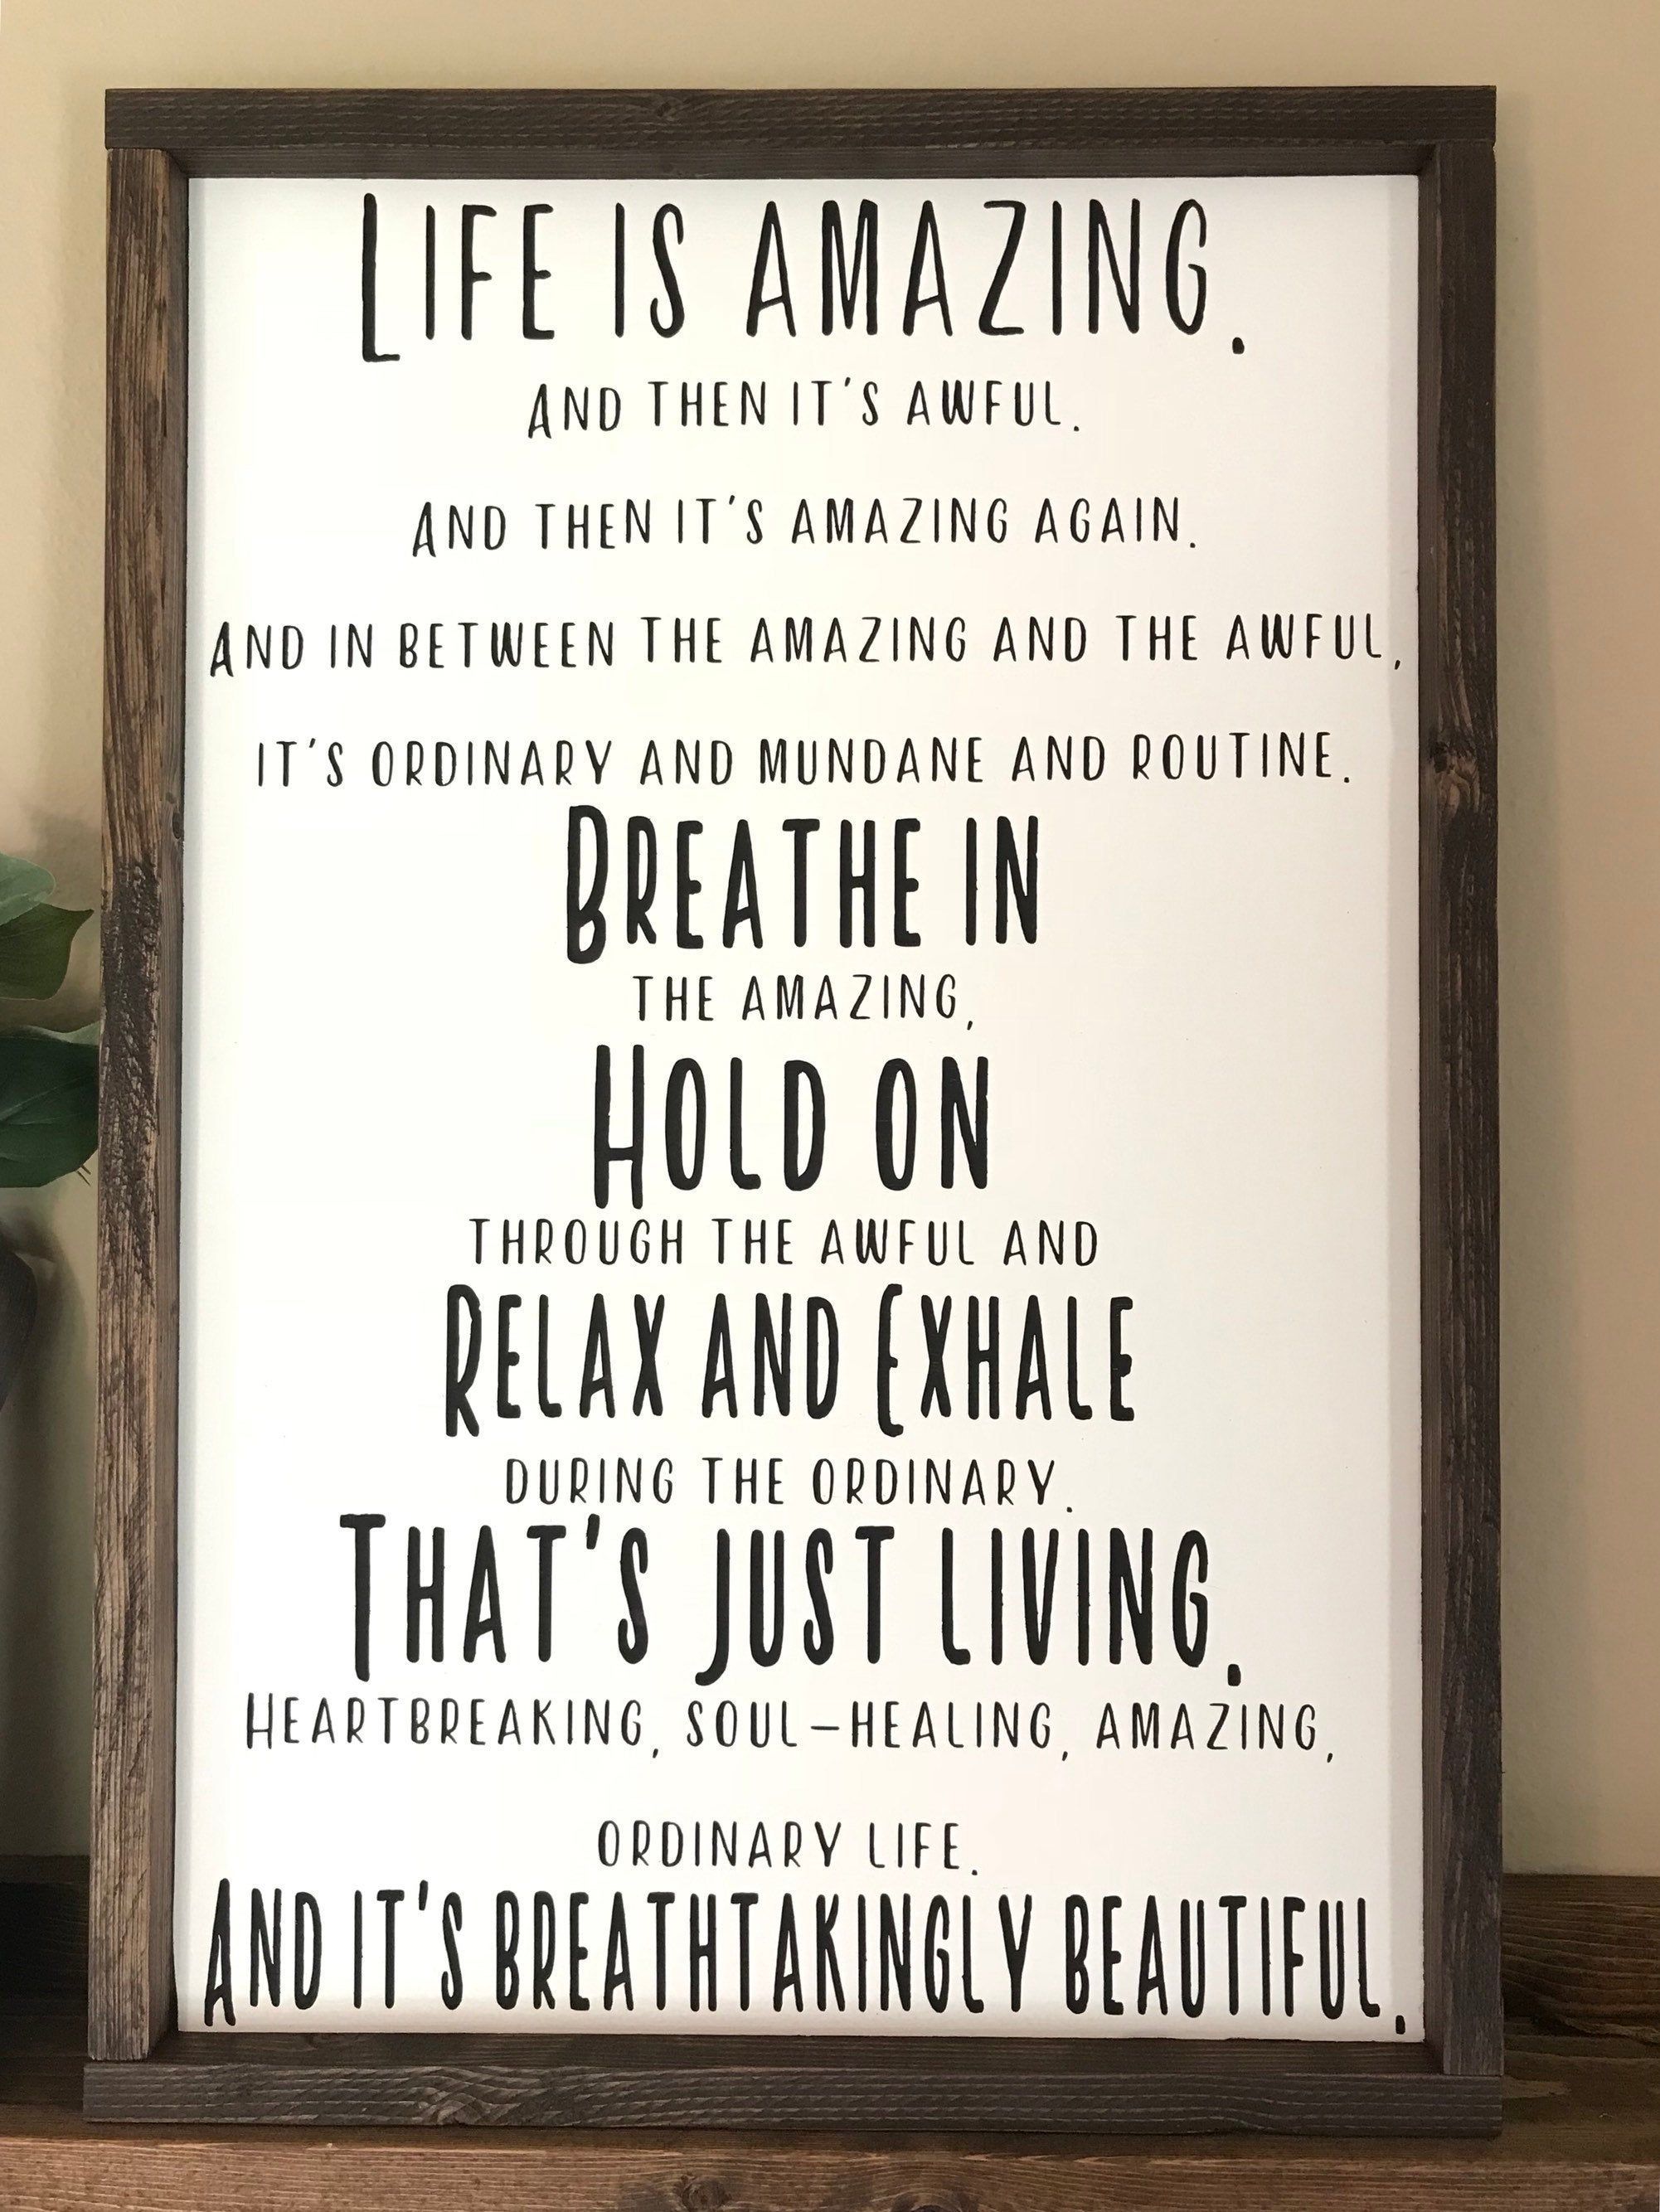 Life is amazing sign, Inspirational sign, Inspirational Quote, Farmhouse Decor, Wood Sign, Gallery Wall Art - Life is amazing sign, Inspirational sign, Inspirational Quote, Farmhouse Decor, Wood Sign, Gallery Wall Art -   16 beauty Life sign ideas